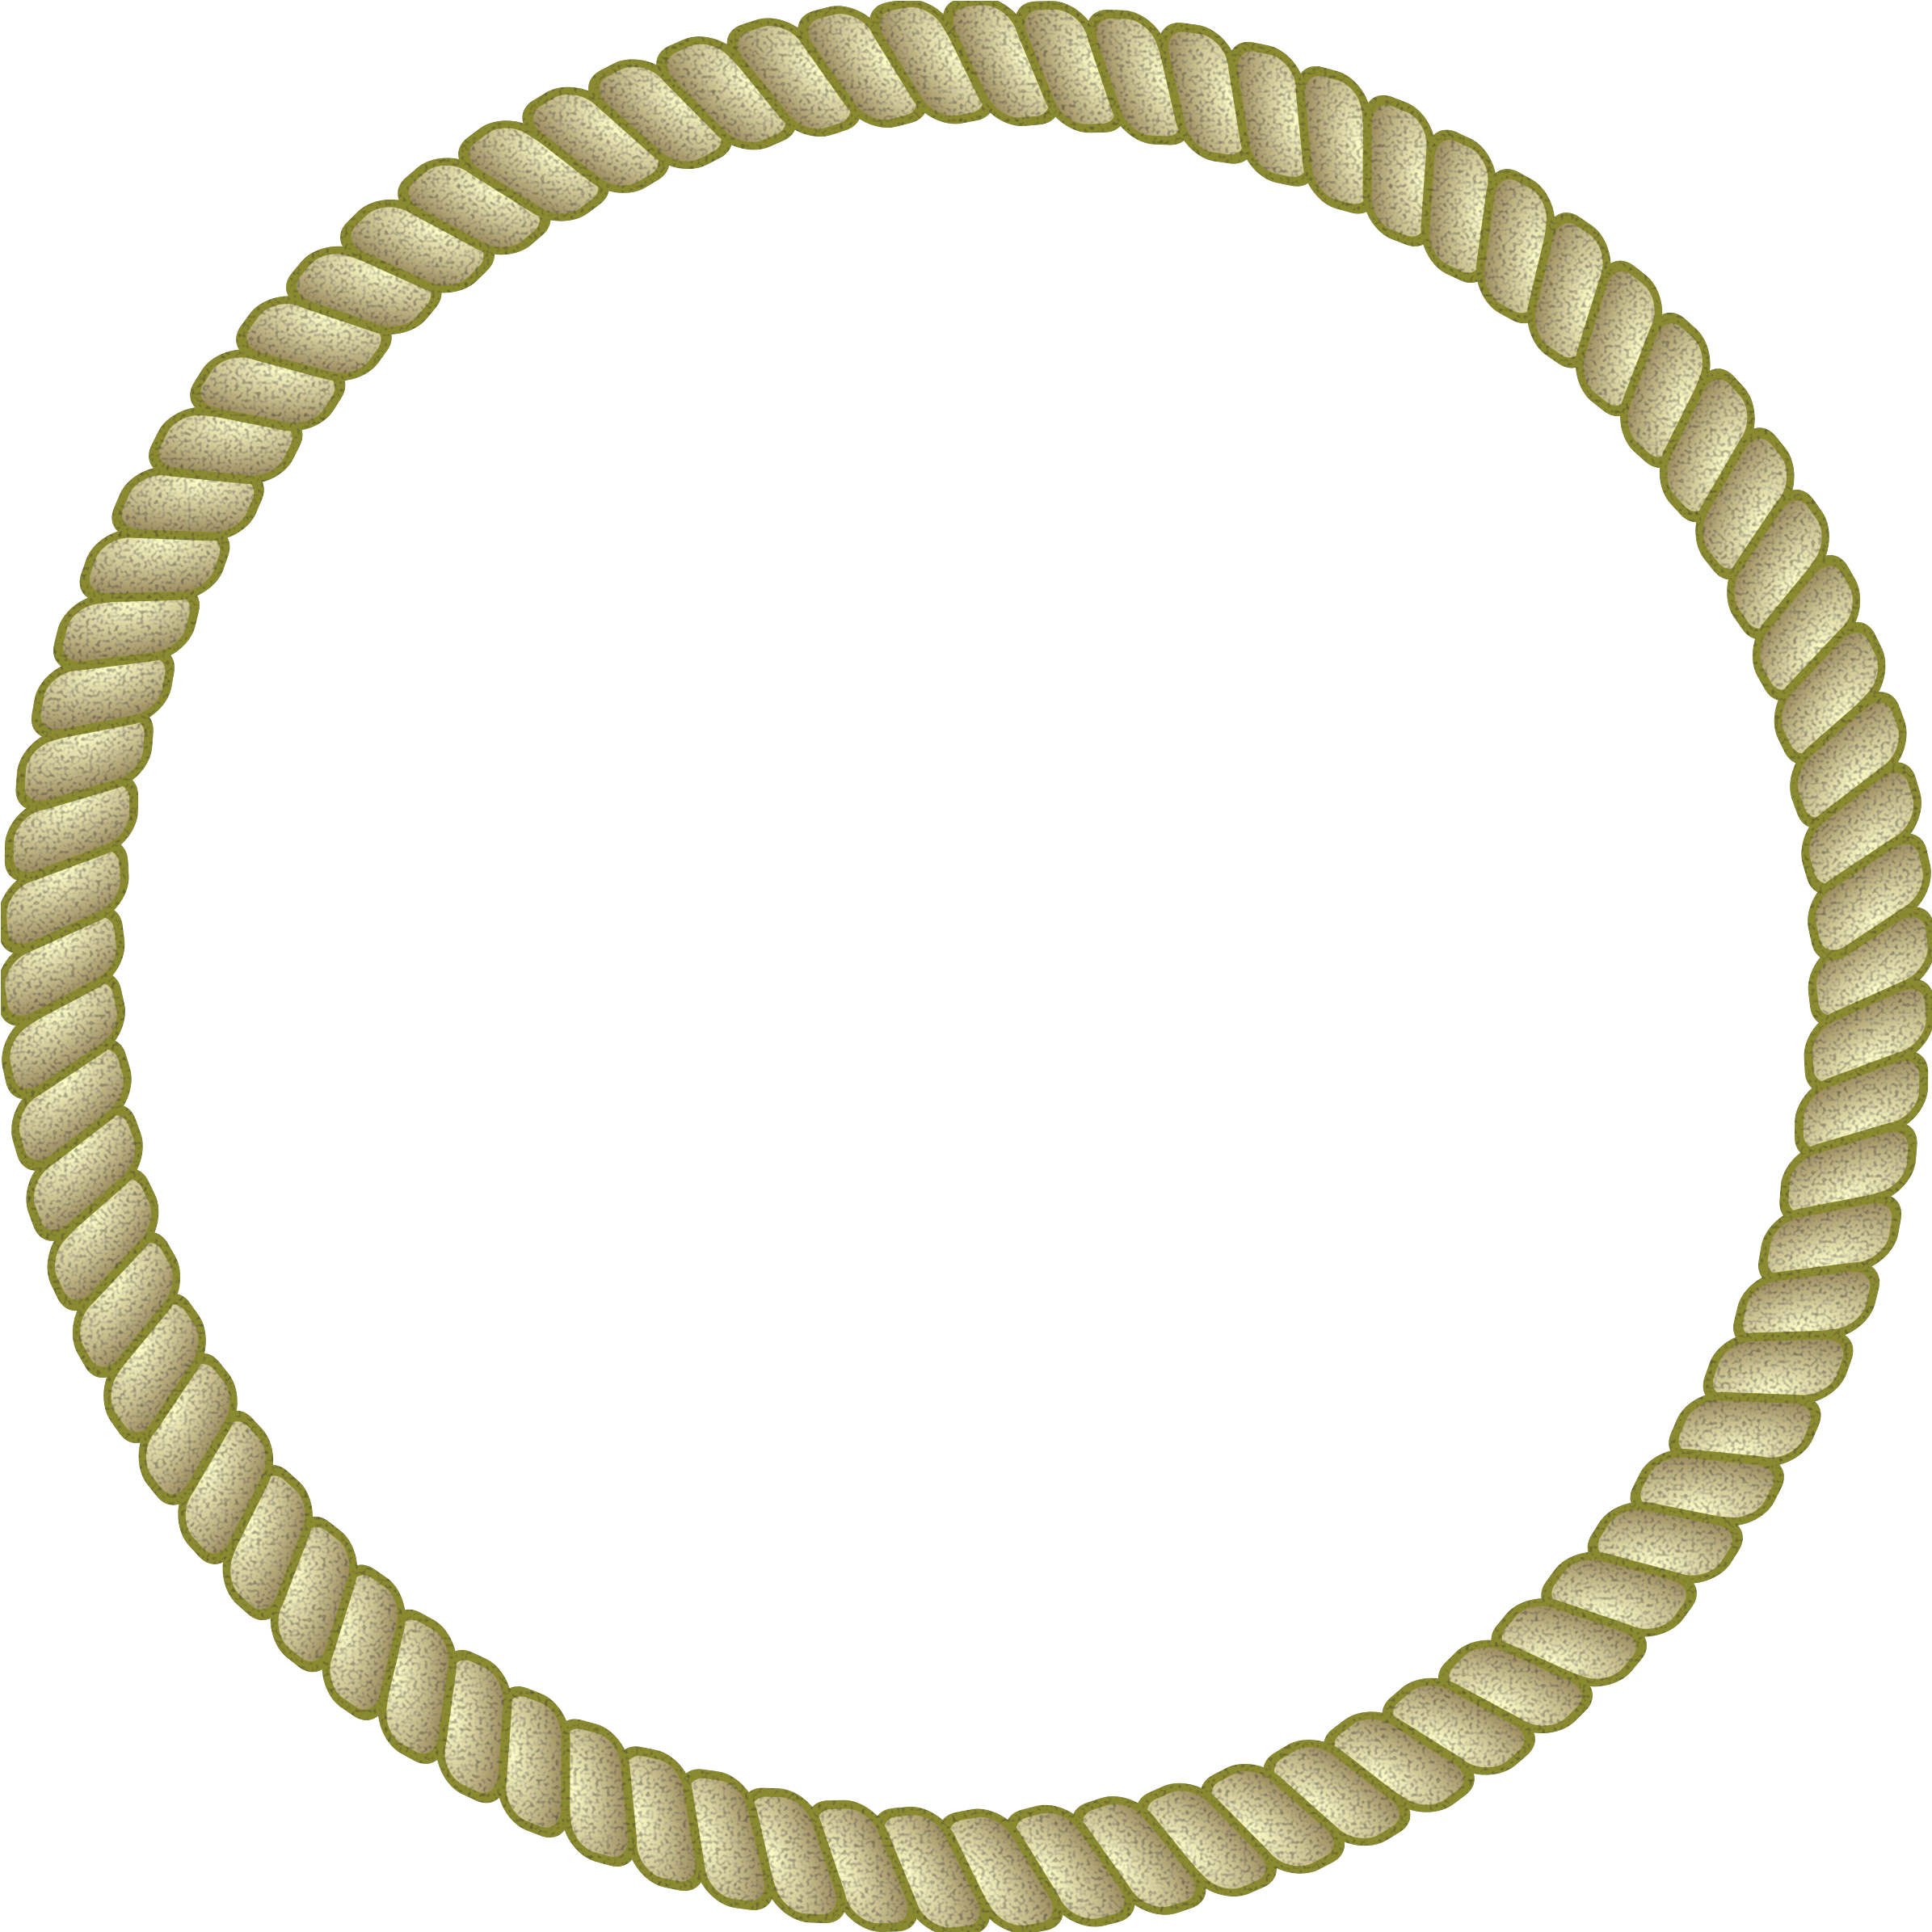 Round Rope Border 86dyt4 Clipart - Round Rope Vector Png (2400x2400)